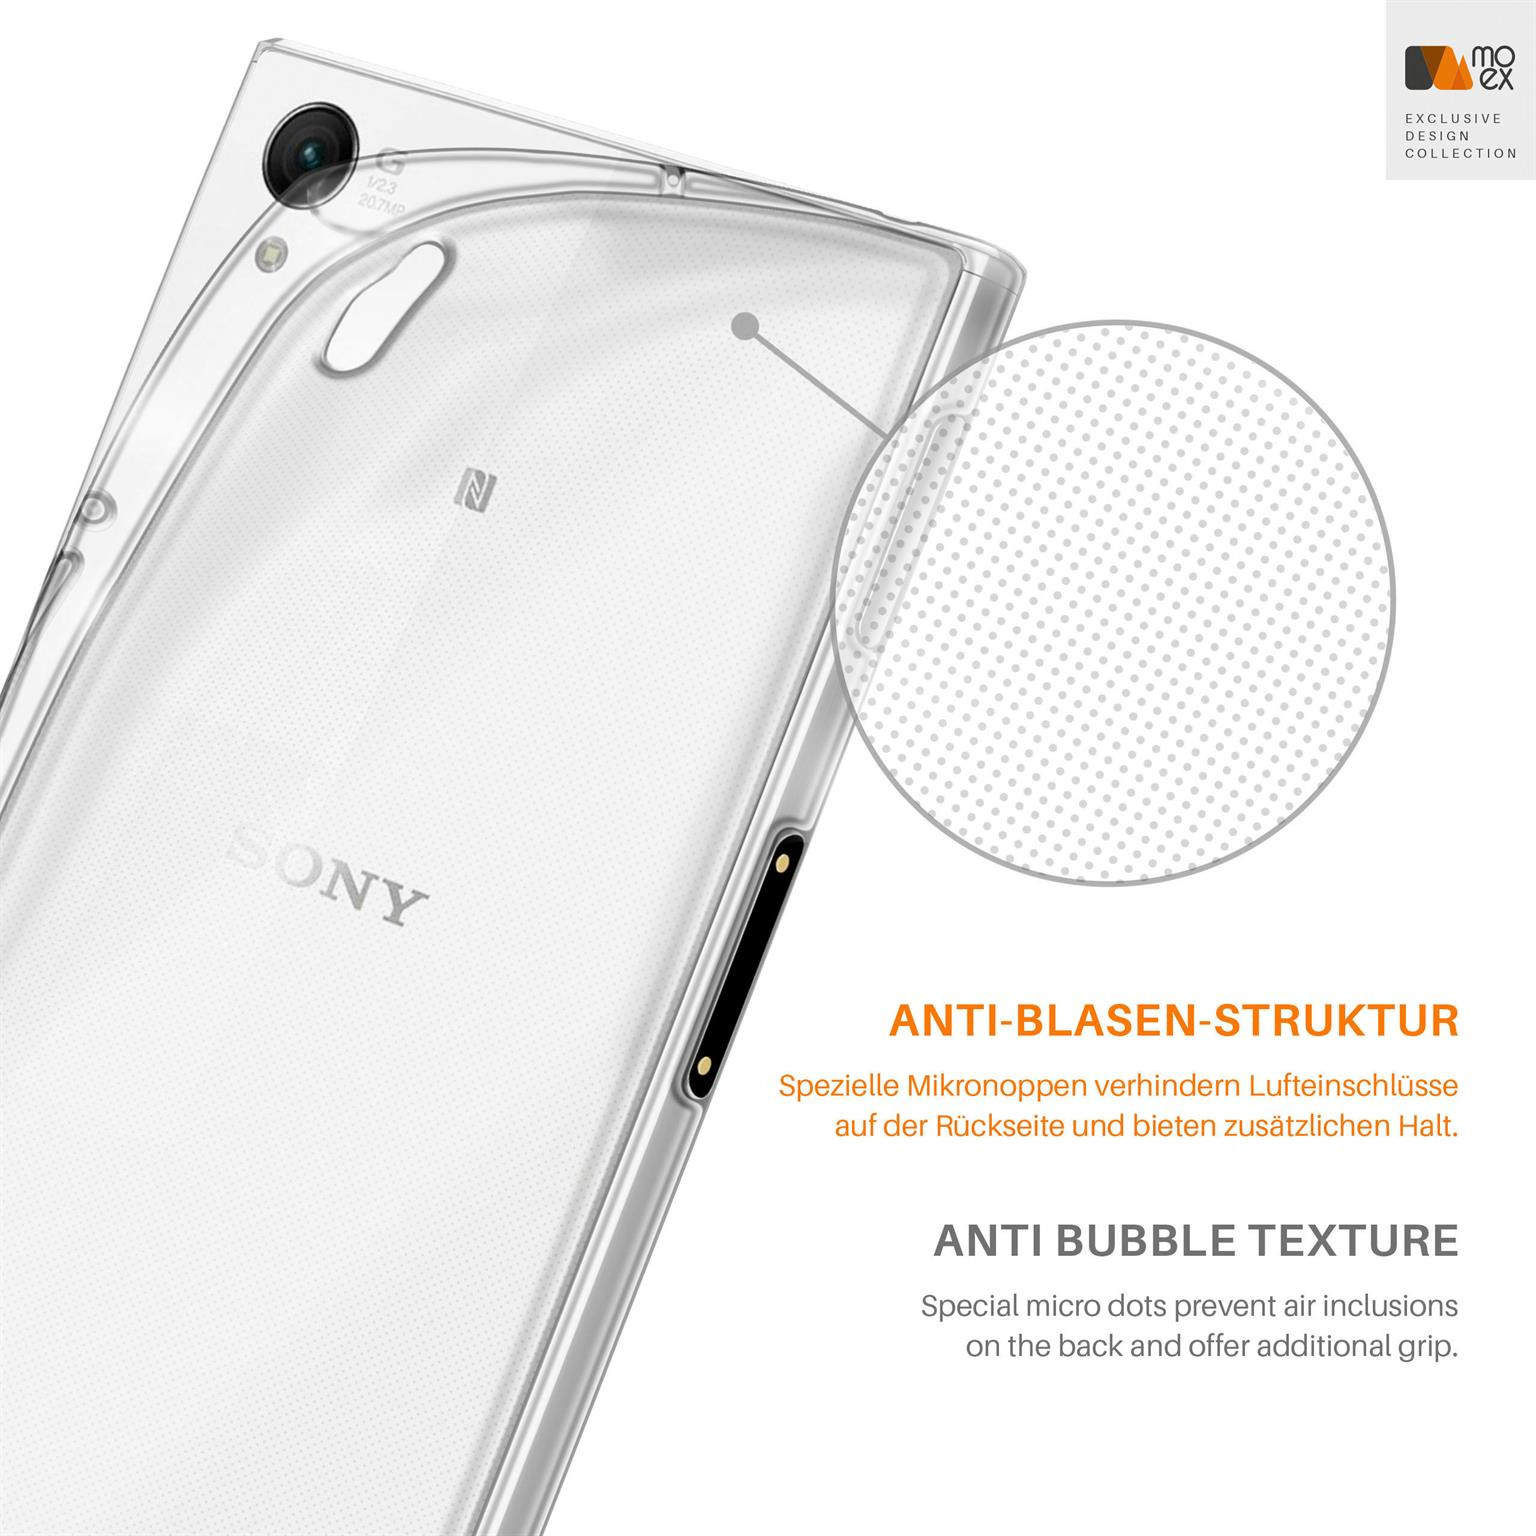 MOEX Aero Case, Backcover, Z2, Sony, Crystal-Clear Xperia